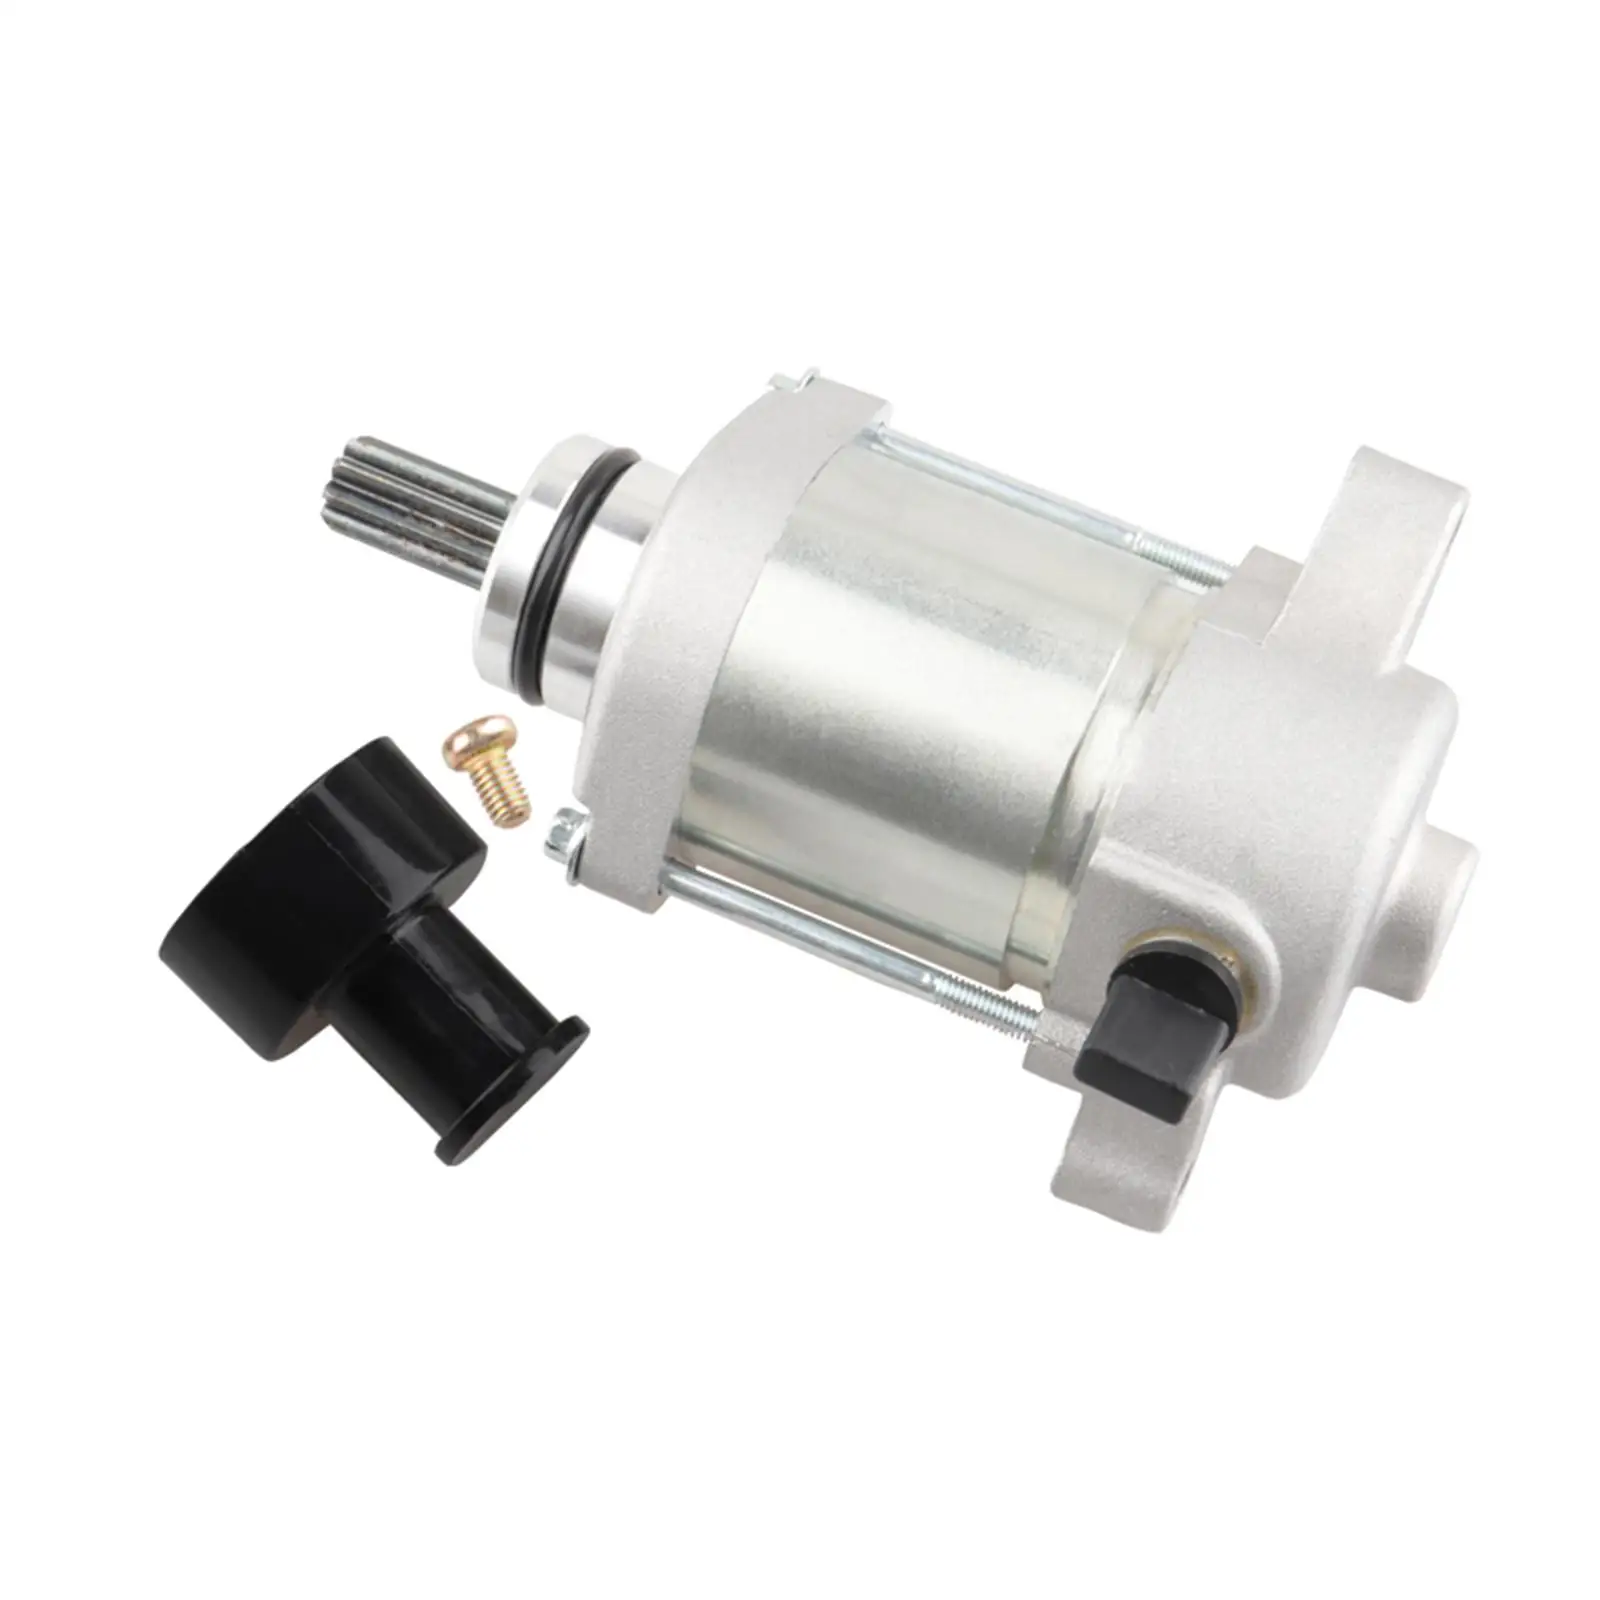 Electrical Engine Starter Motor Repair Parts 9T for Aprilia RXV450 RXV550 Sxv550 Sxv450 Convenient Installation Lightweight